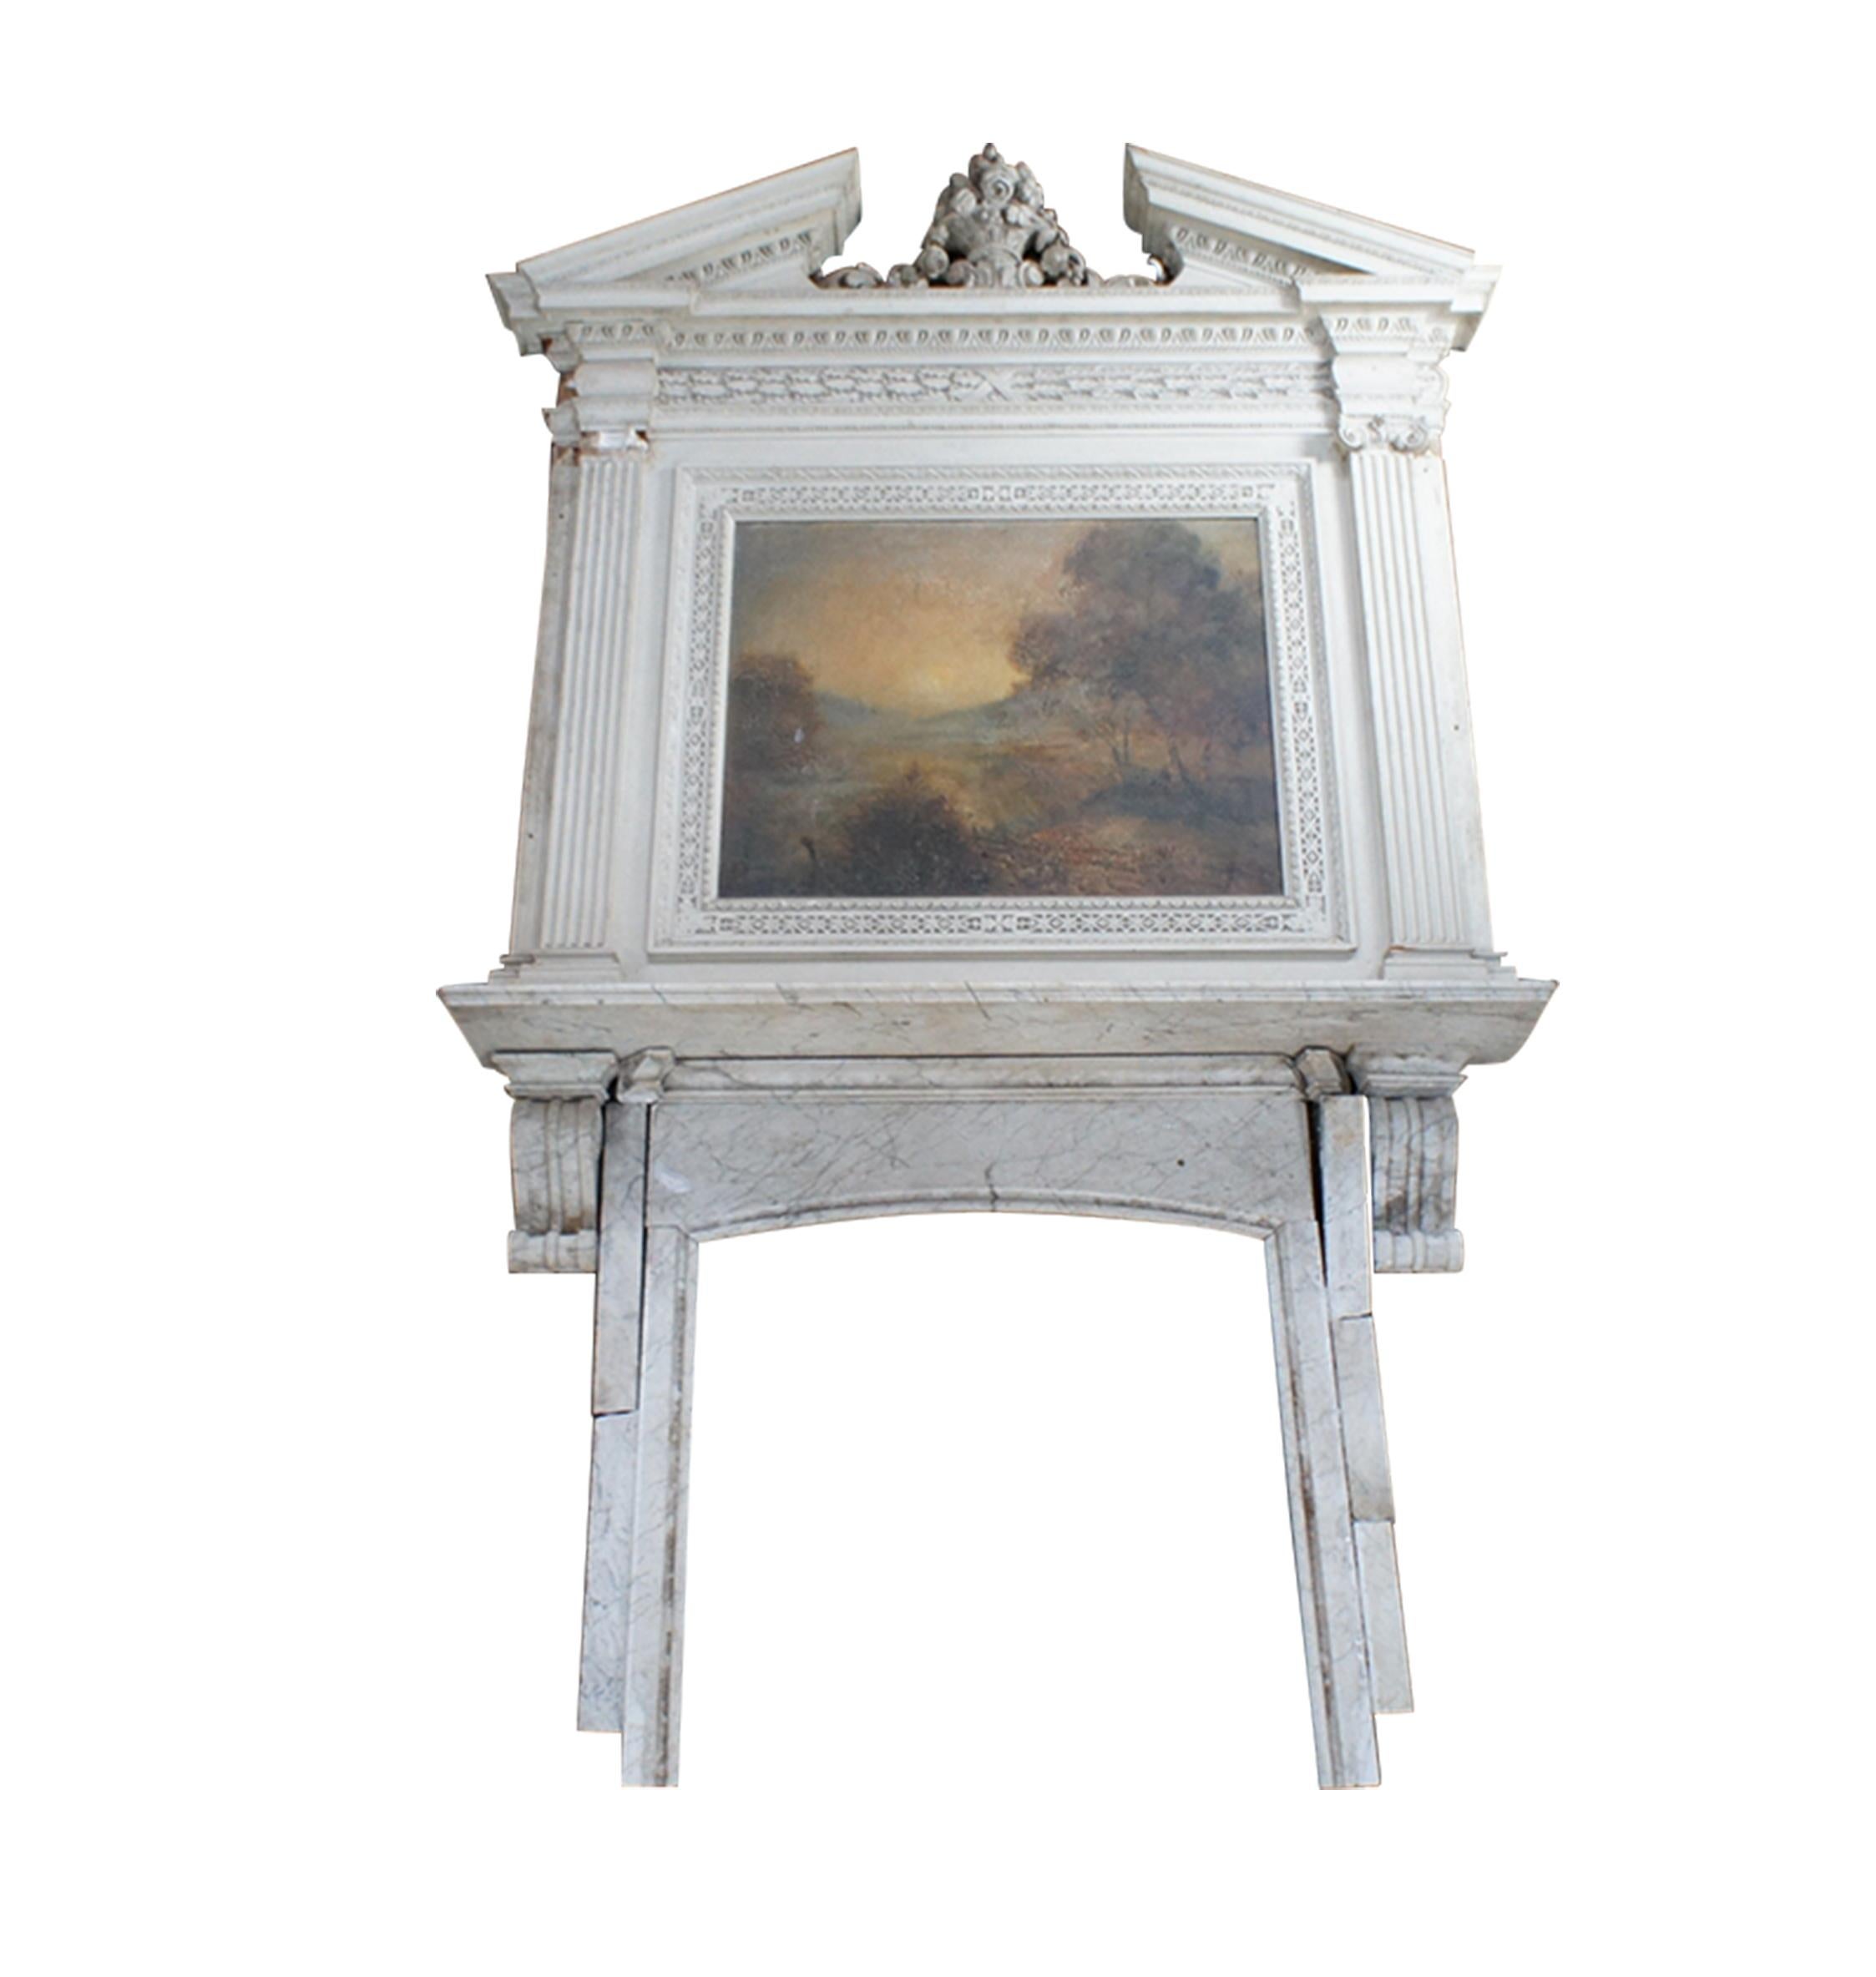 A very large and impressive fireplace mantel with Neoclassical and Grecian styling that features an impressive carved over mantel with open pediment design and ornate flower urn with acanthus accents.  Features fluted columns, egg and dart molding,